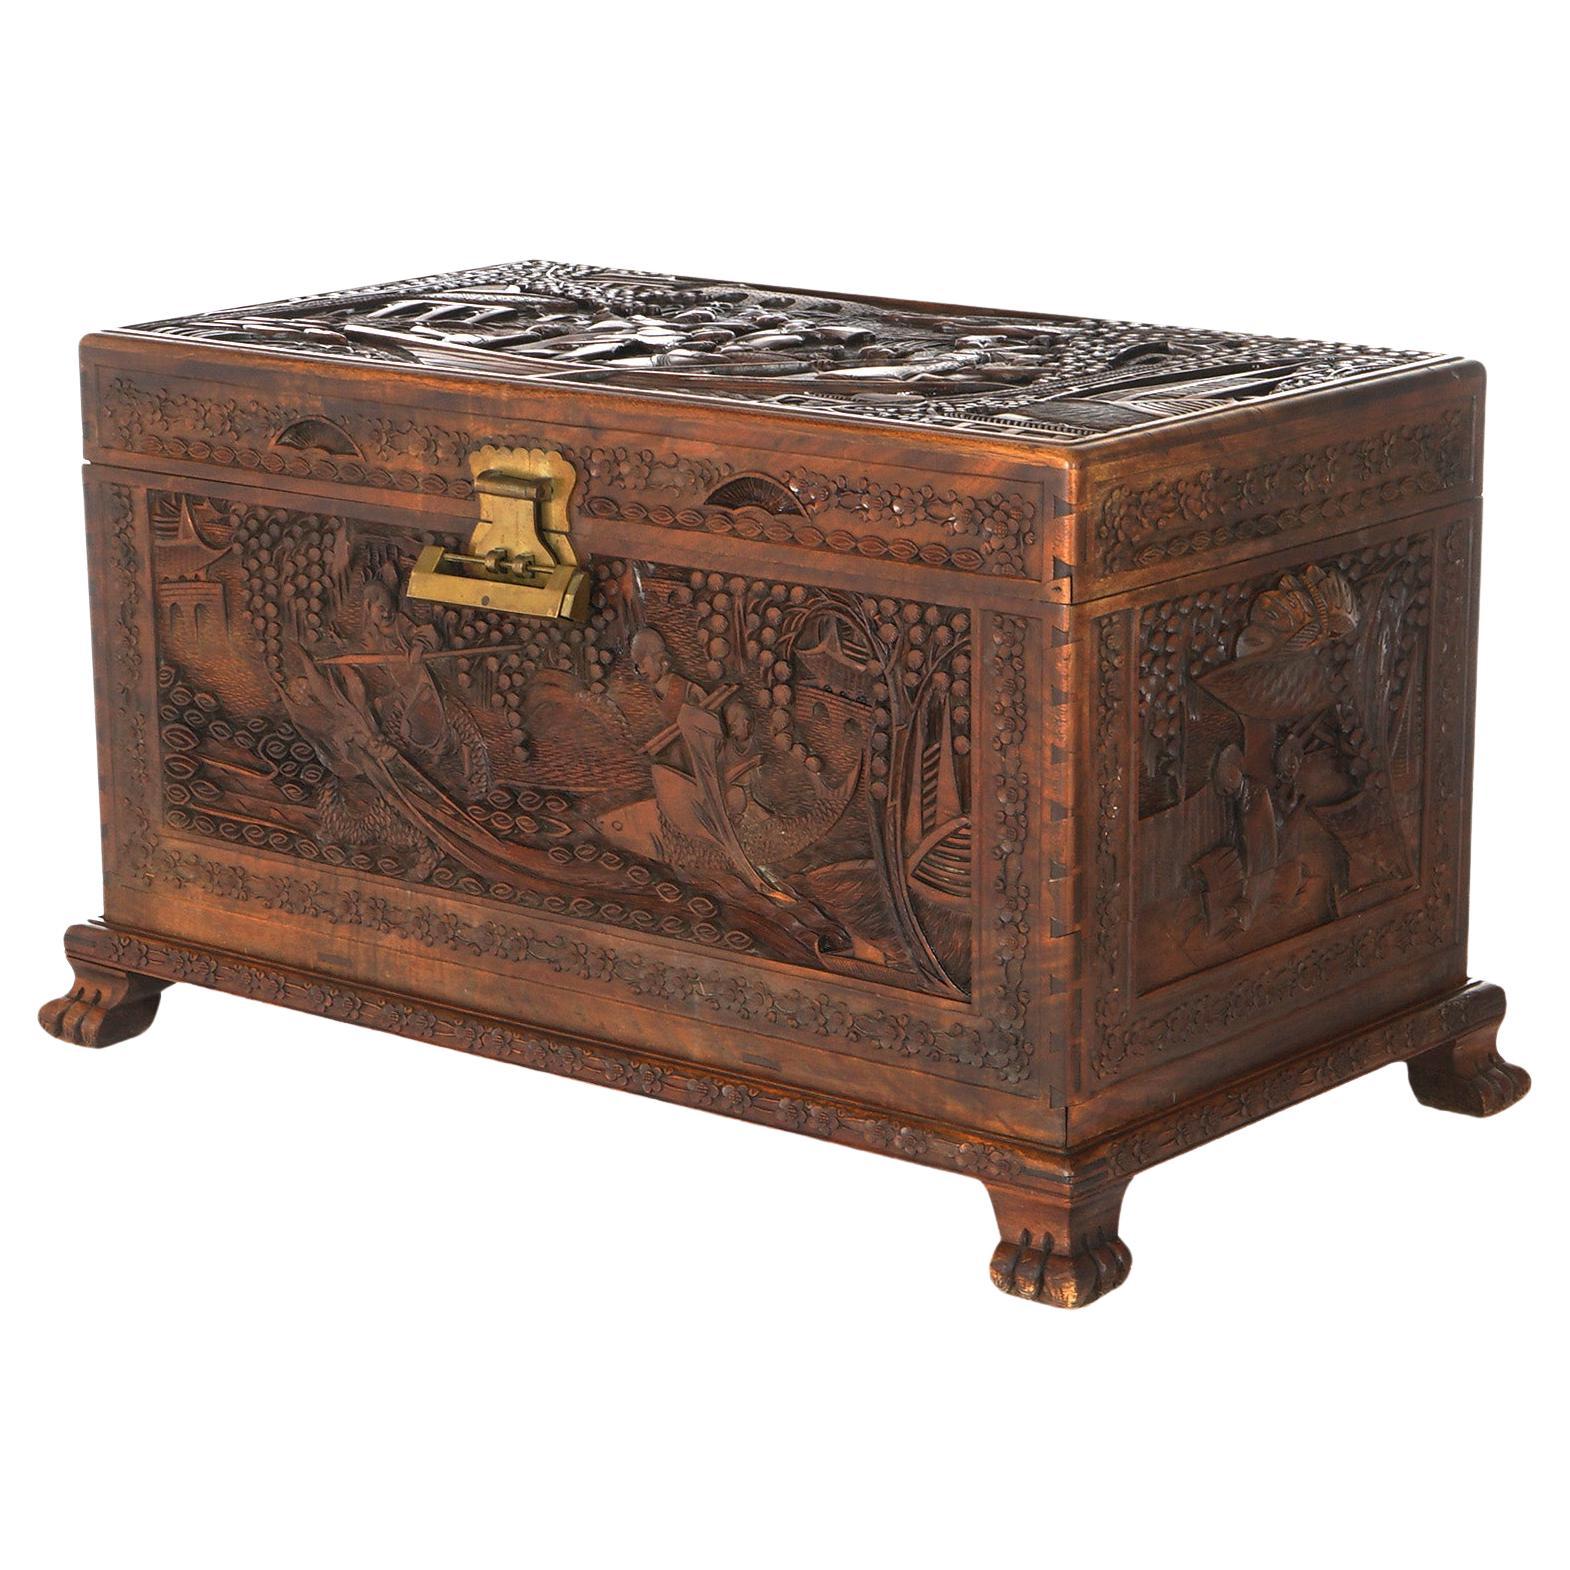 Antique Chinese Hardwood Carved in Relief Chinoiserie Blanket Chest Chest C1920